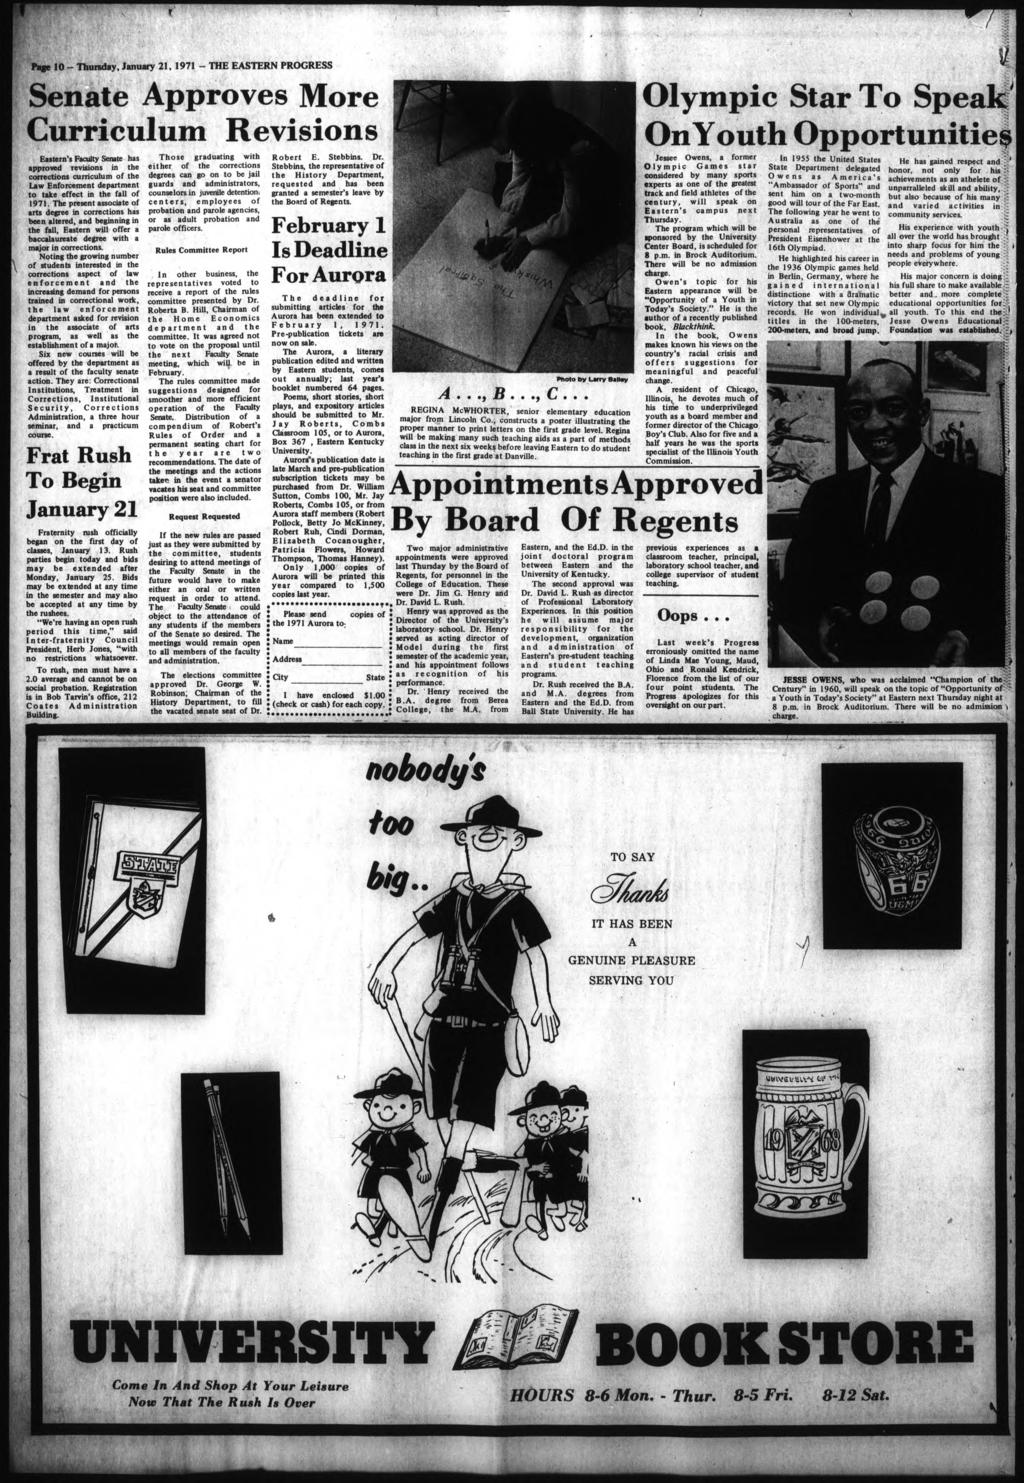 Page 10 - Thursday, January 21, 1971 - THE EASTERN PROGRESS Jl Senate Approves More Currculum Revsons Eastern's Faculty Senate has approved revsons n the correctons currculum of the Law Enforcement